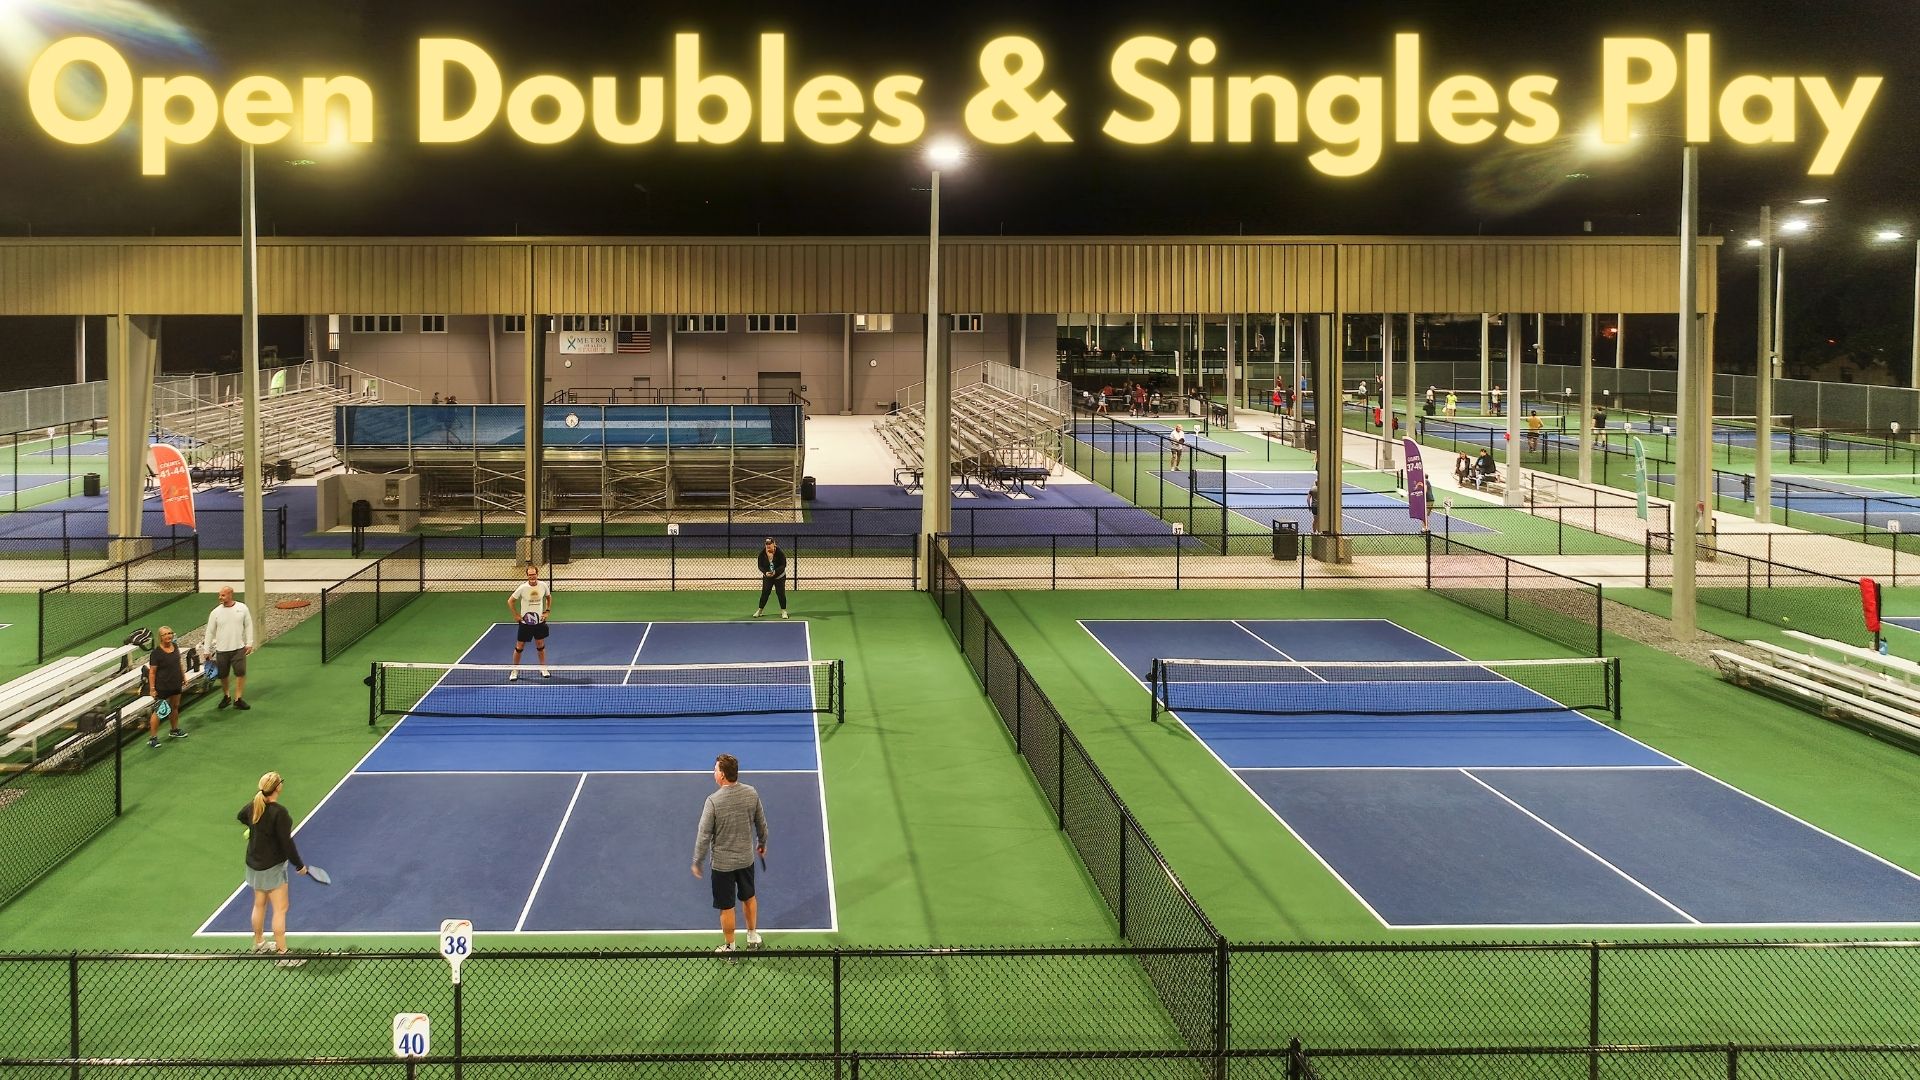 Open Doubles & Singles Play